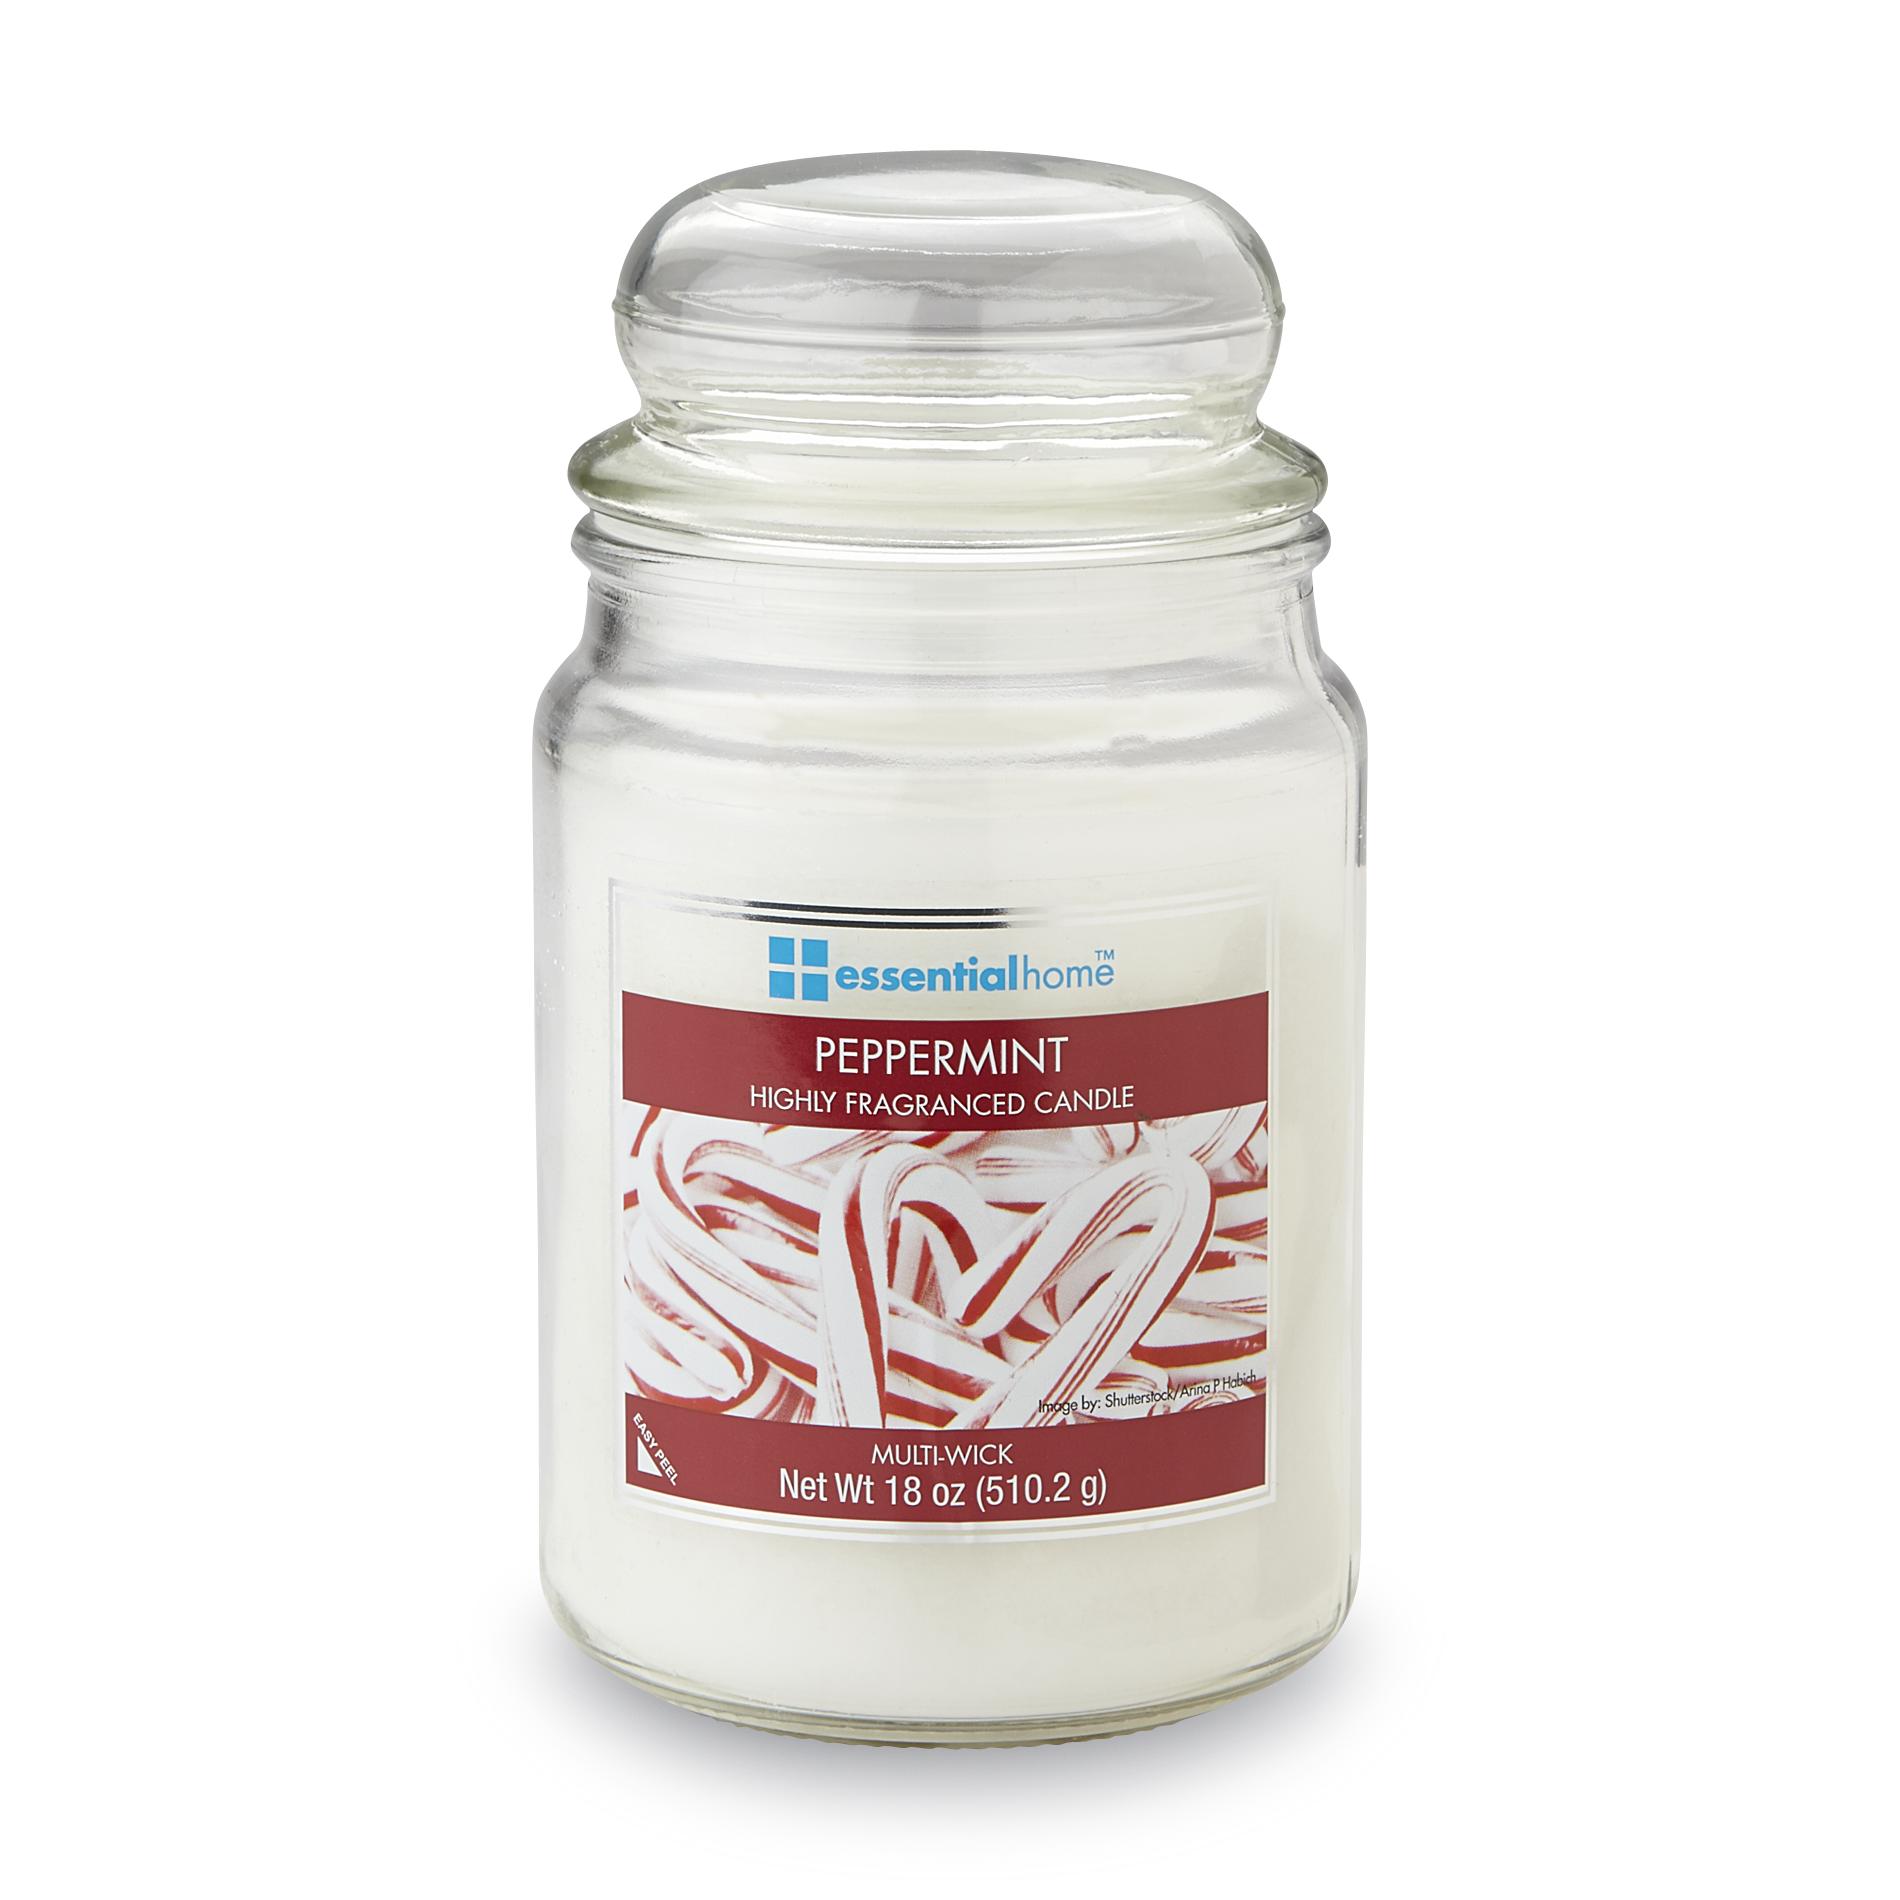 Essential Home Lidded Christmas Jar Candle - Peppermint